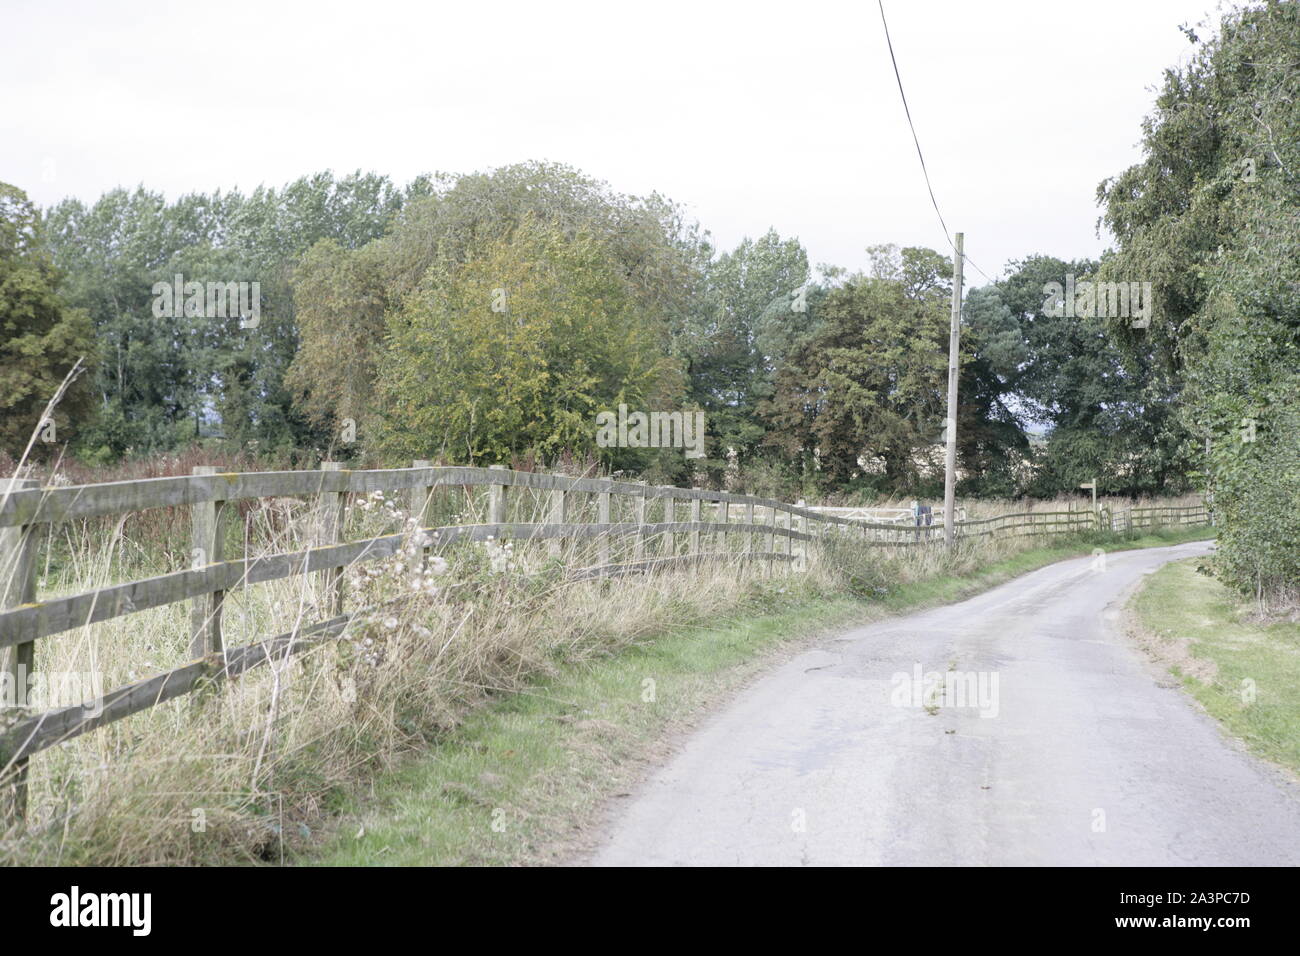 Narrow Winding Country Road with Wooden Fencing and Grass Verges Stock Photo